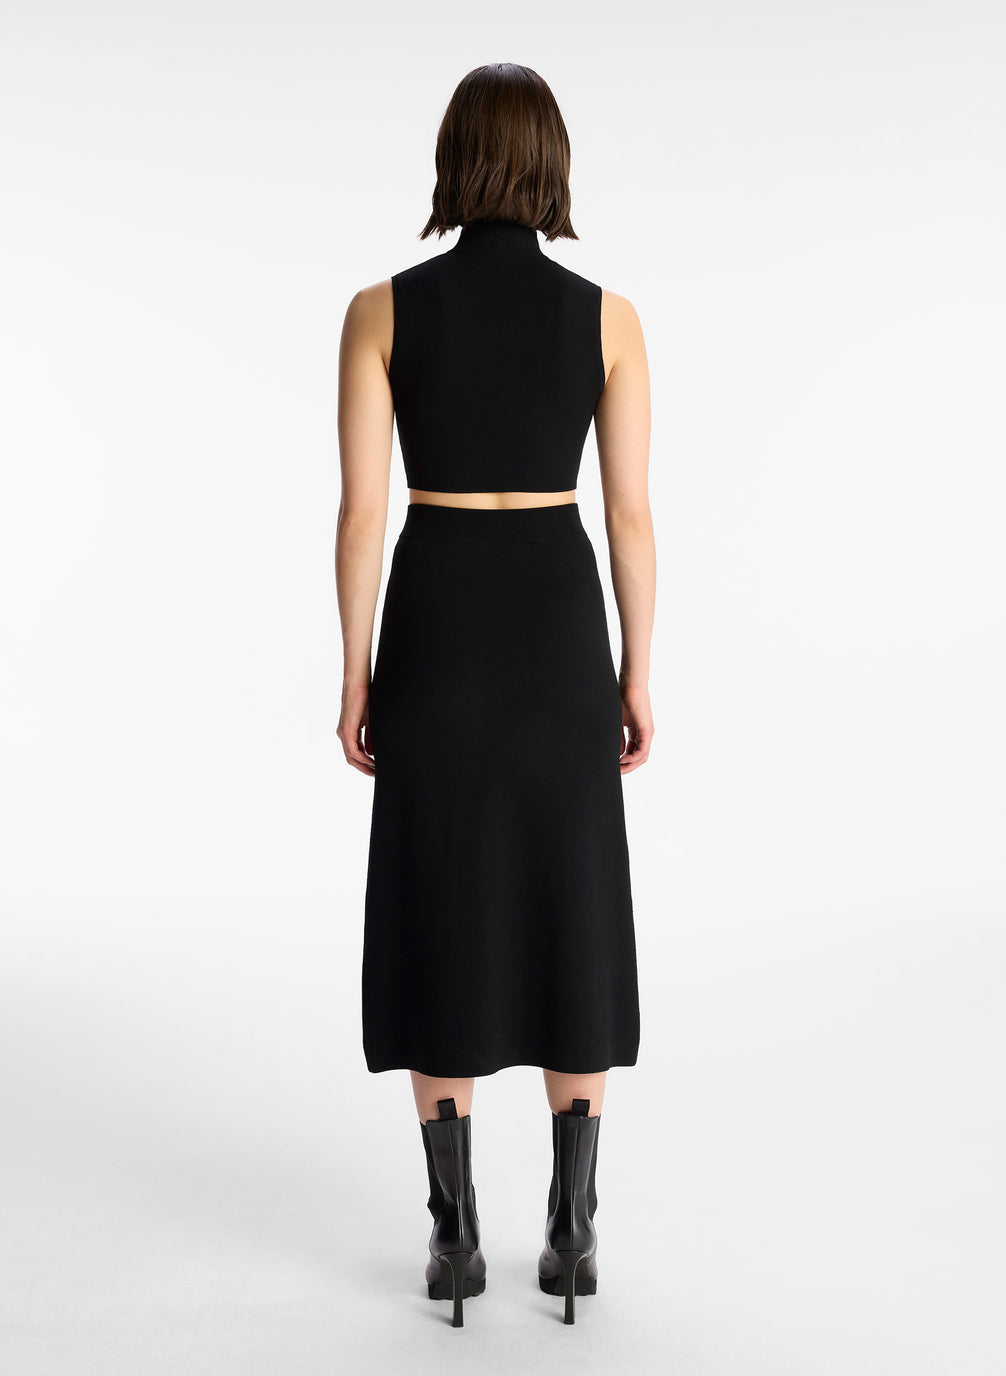 back view of woman wearing black half zip compact knit sleevless cropped top with matching black skirt